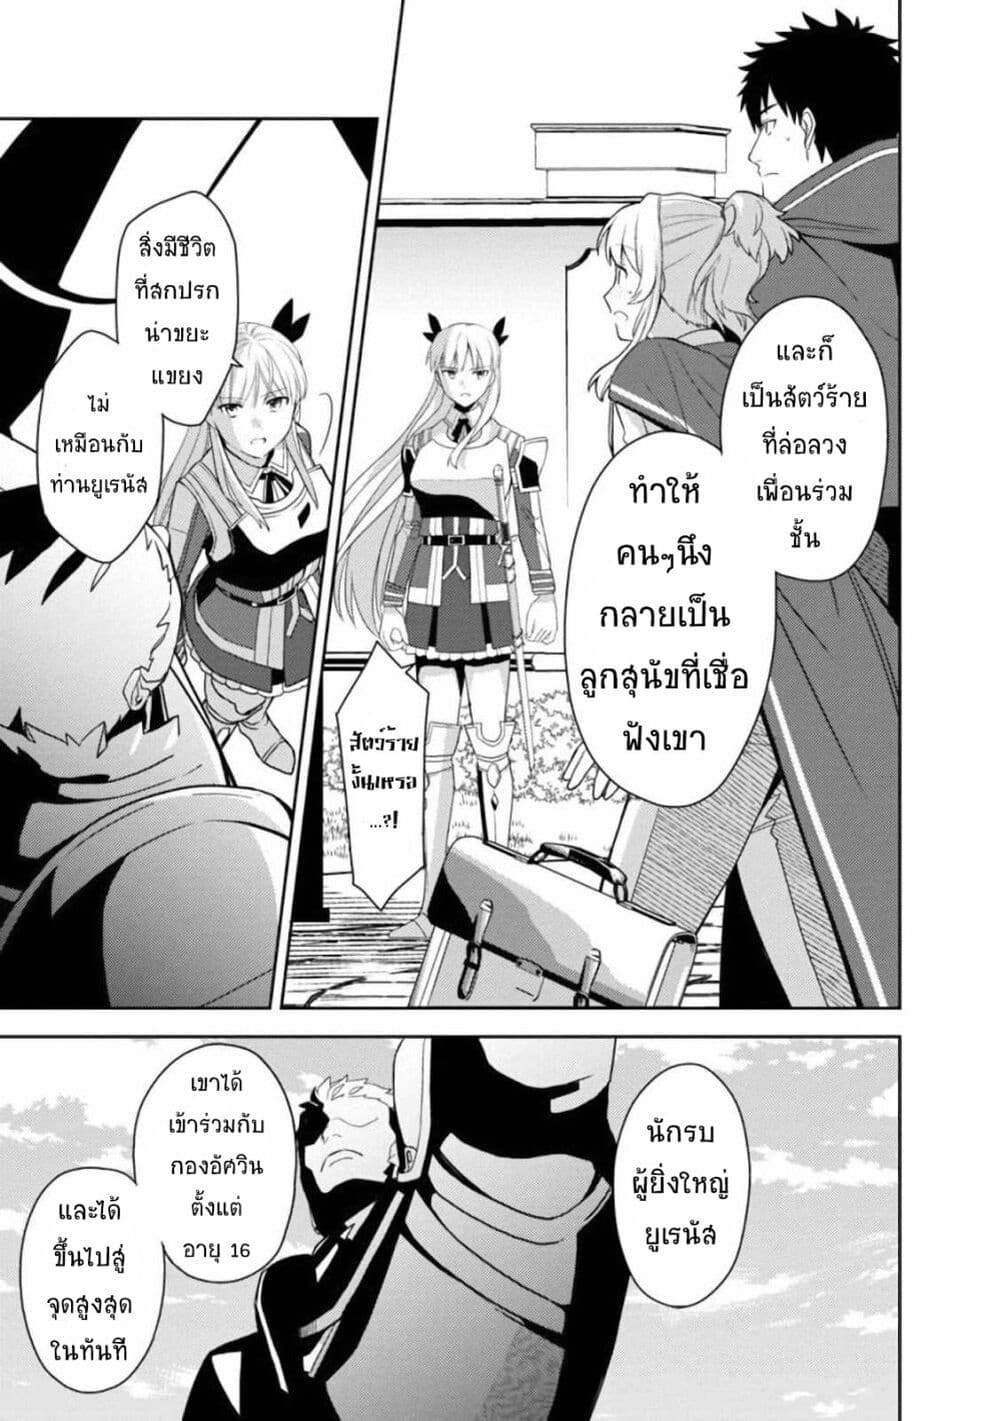 The Reincarnated Swordsman With 9999 Strength Wants to Become a Magician! ตอนที่ 2.2 (15)